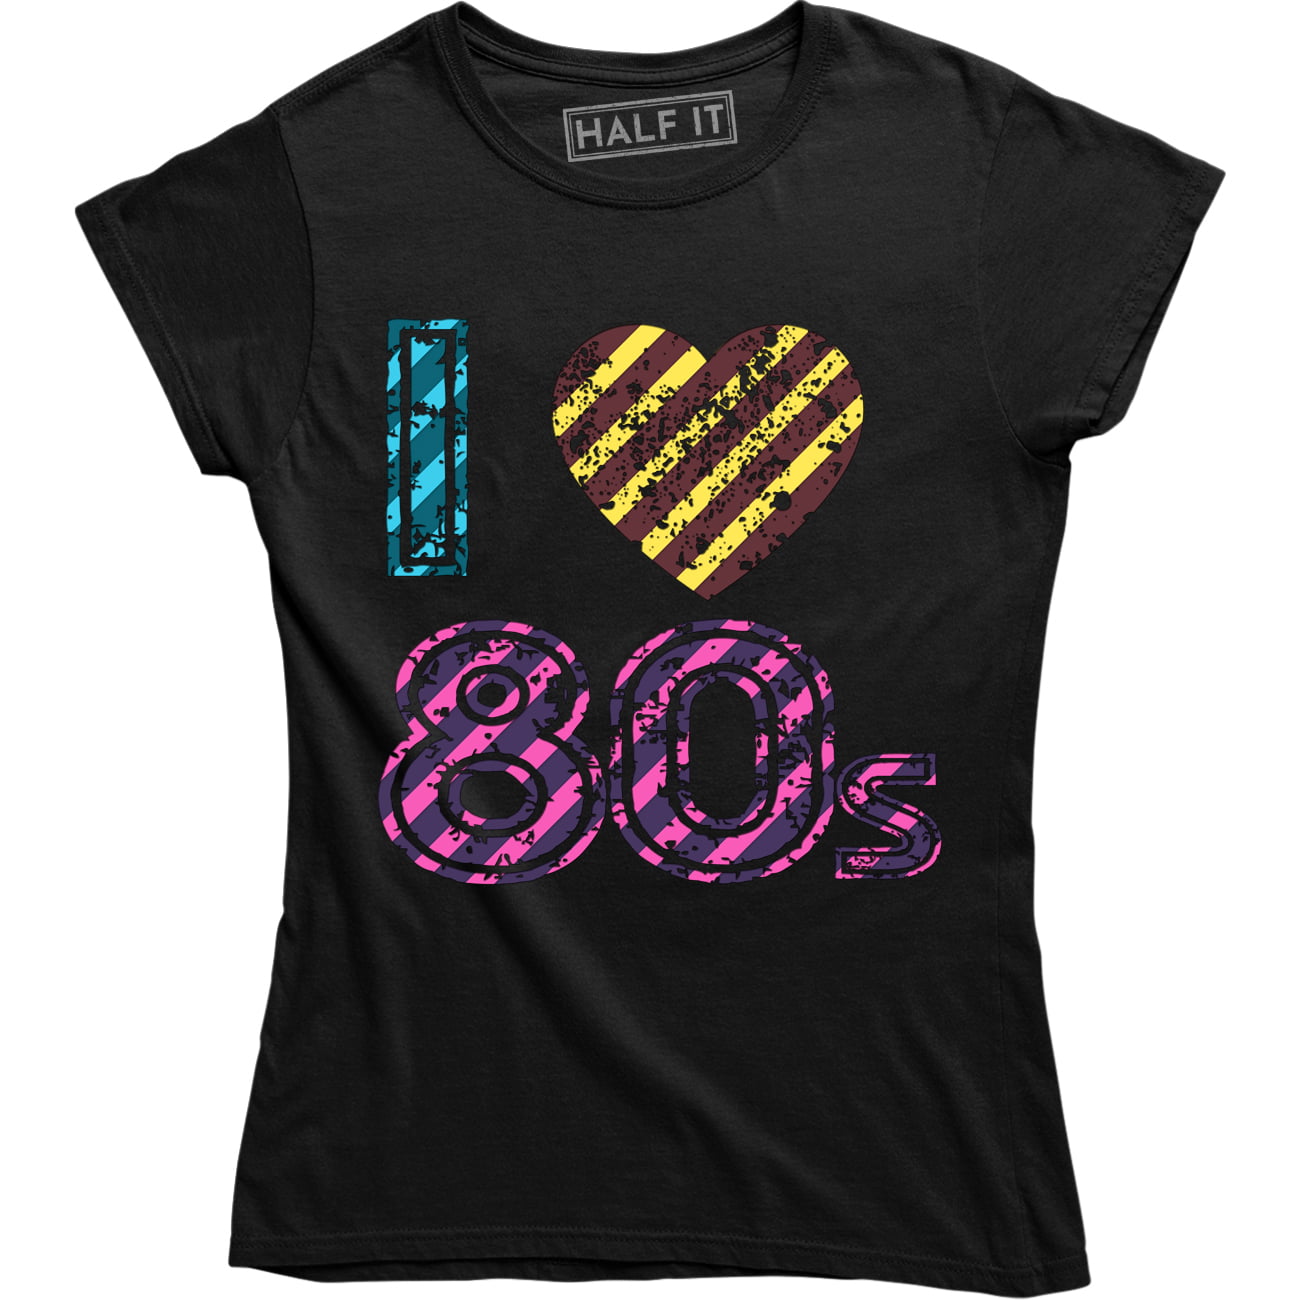 Back To The 80's Ladies Fitted T-Shirt Fancy Dress Neon Print Love 80s Party Top 